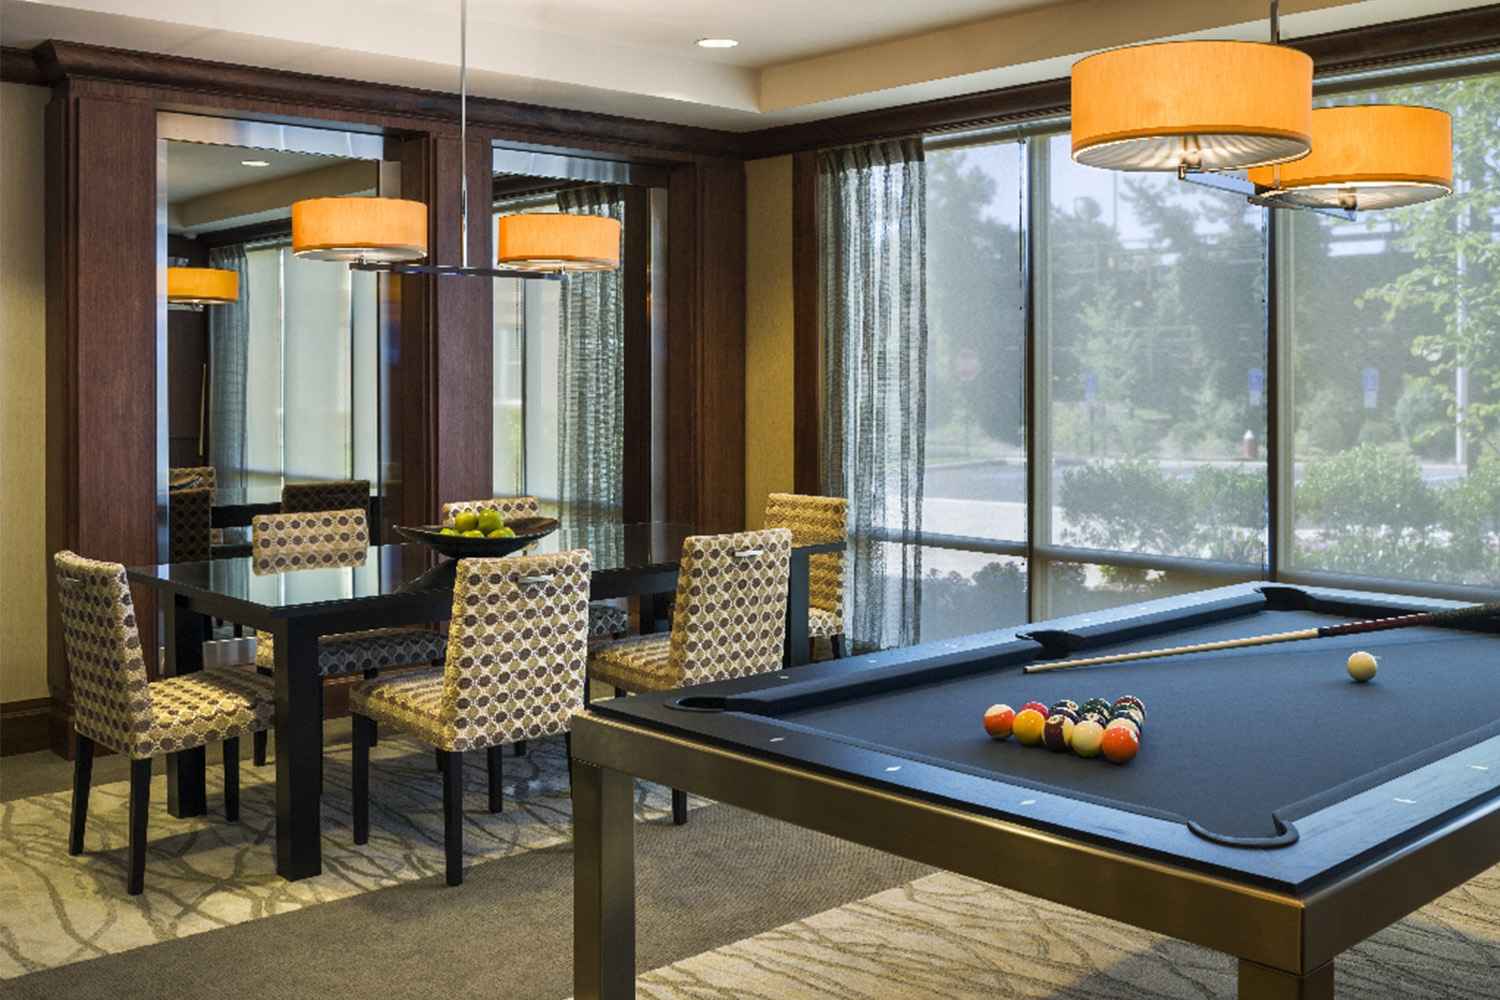 Lounge area with pool table and table with seating 